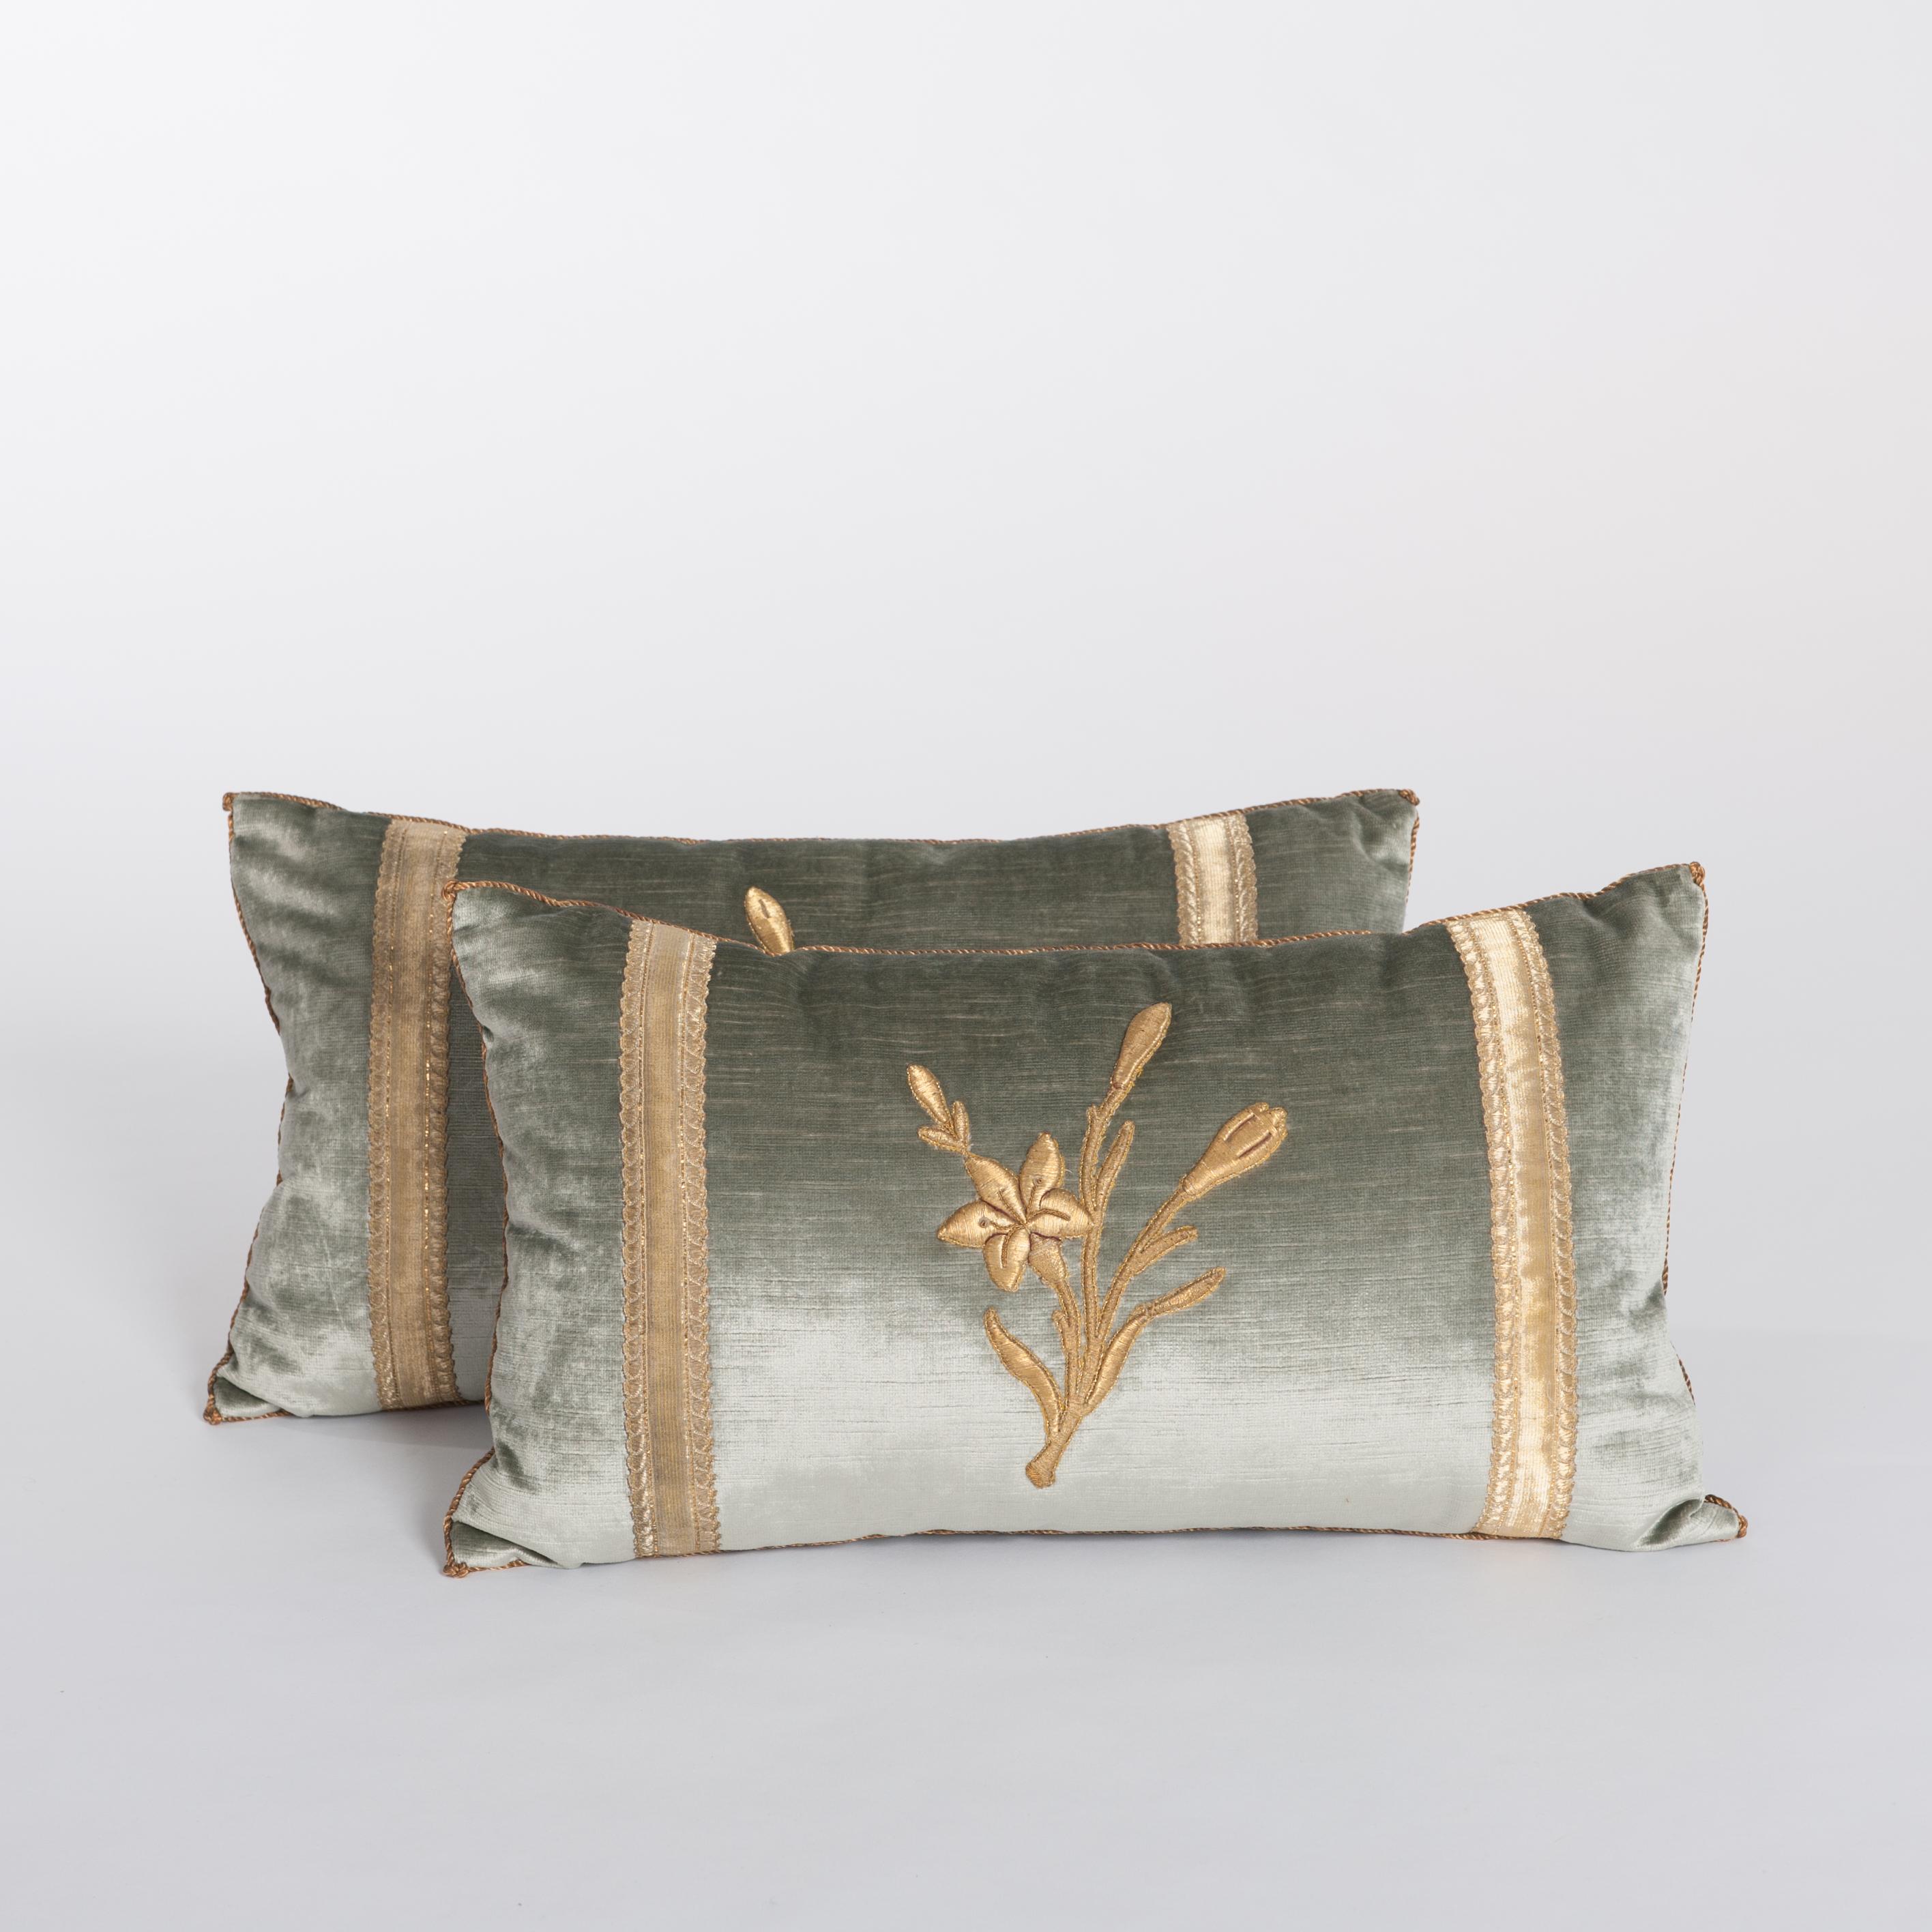 A pair of down-filled pillows fabricated with a 19th century raised gold metallic
embroidery of flowers with antique gold metallic gallon on pale French green-grey velvet.
Hand trimmed with vintage gold metallic cording knotted in the corner.